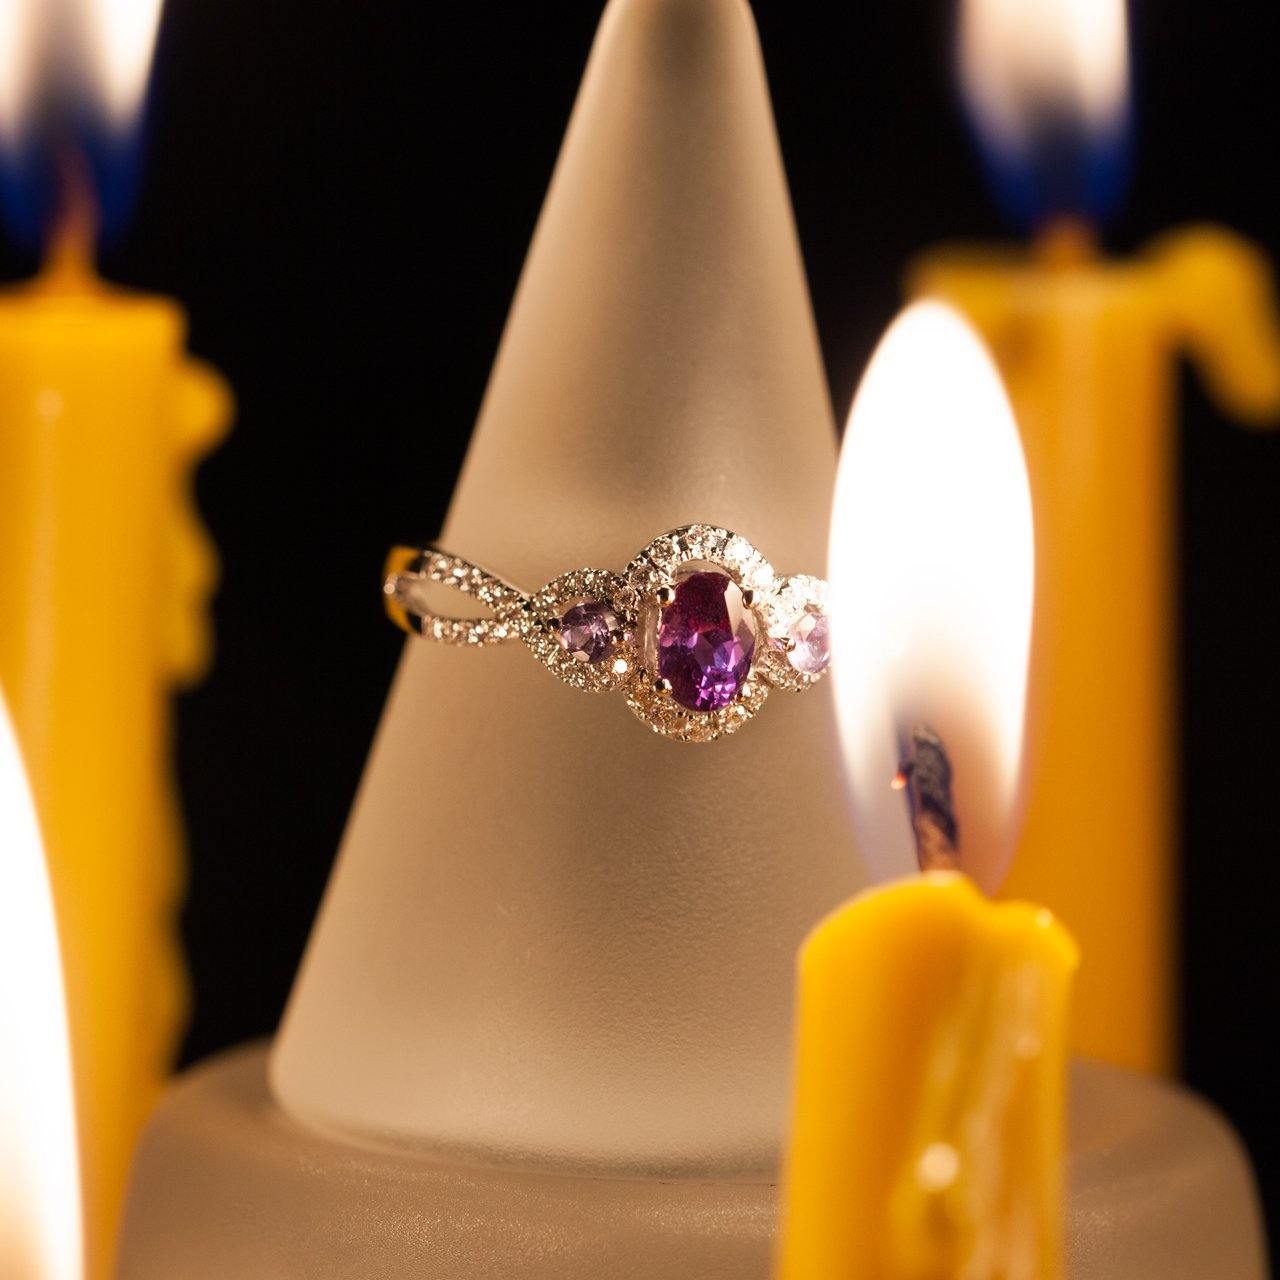 0.42ct natural alexandrite in an 18k white gold setting showcased on a candle